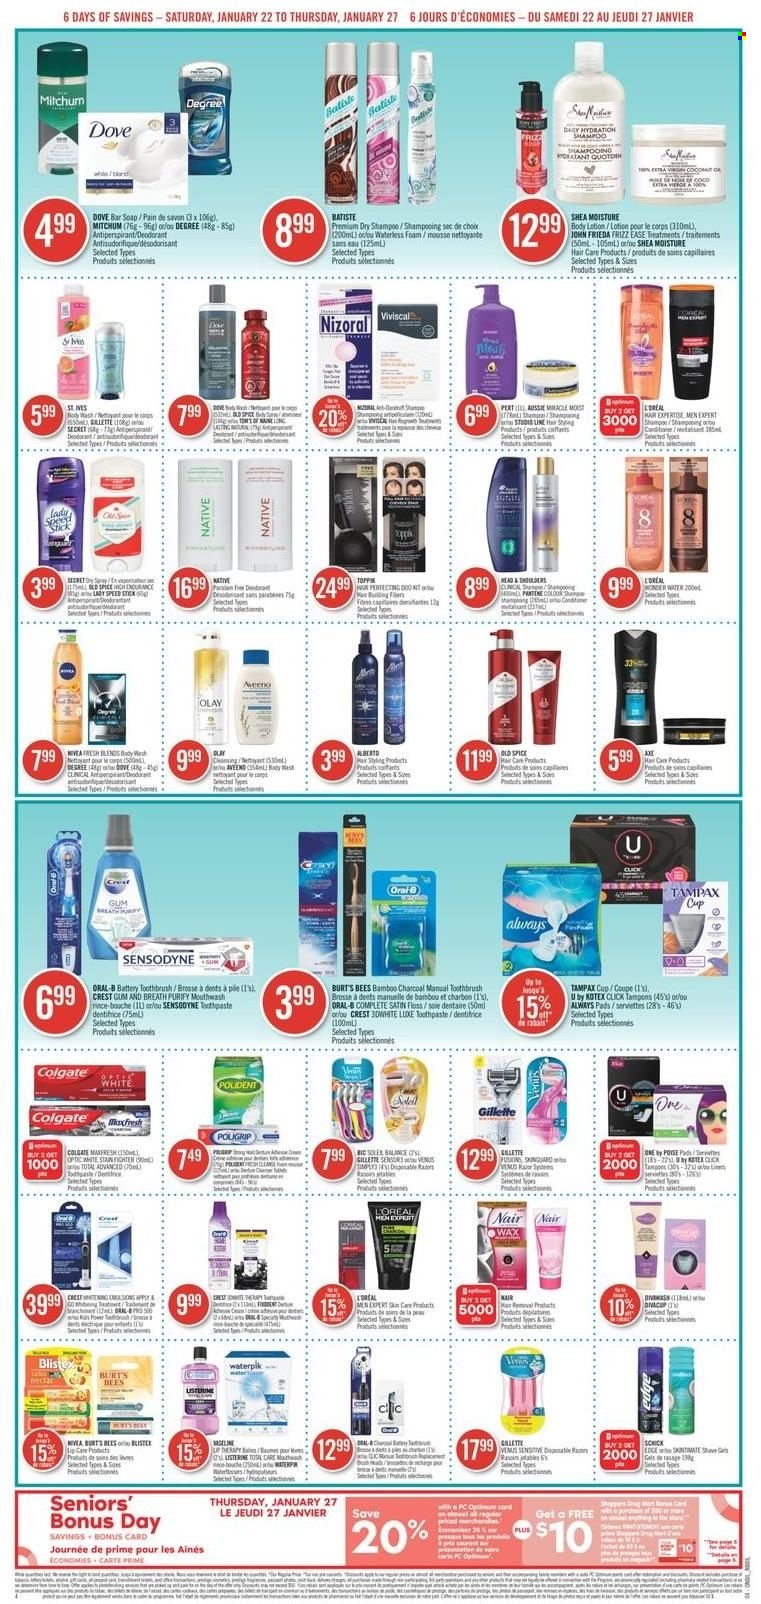 thumbnail - Shoppers Drug Mart Flyer - January 22, 2022 - January 27, 2022 - Sales products - spice, Aveeno, body wash, soap bar, soap, toothbrush, toothpaste, mouthwash, Polident, Crest, Always pads, Kotex, tampons, L’Oréal, Olay, Aussie, John Frieda, Toppik, body lotion, anti-perspirant, Speed Stick, BIC, Schick, Venus, Dove, Colgate, Gillette, shampoo, Tampax, Pantene, Old Spice, Oral-B, Sensodyne, deodorant. Page 4.